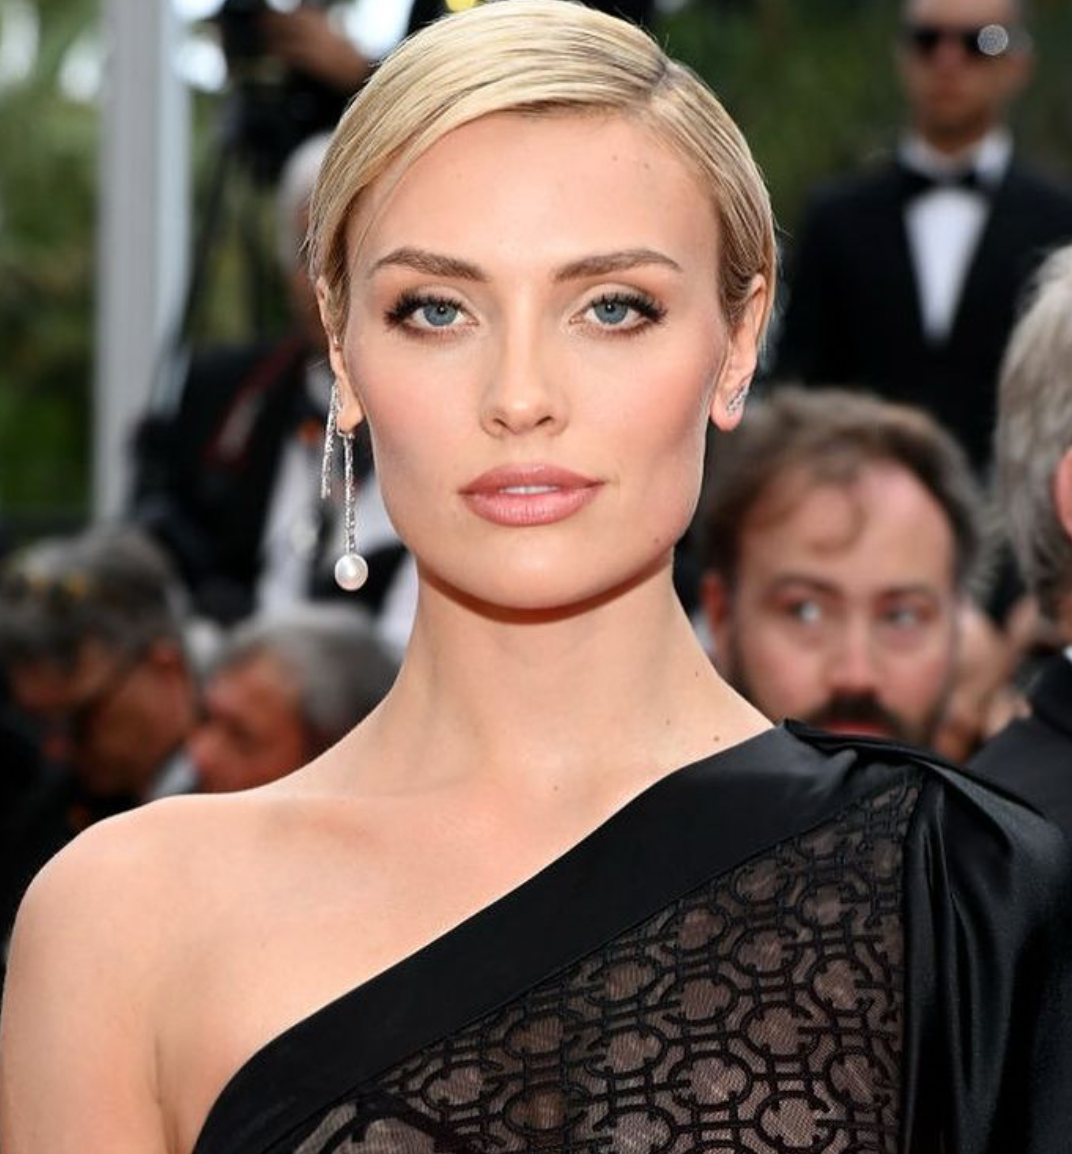 Actress Wallis Day wearing the Île Pear Column Earrings to the Top Gun: Maverick premiere at the Cannes Festival.